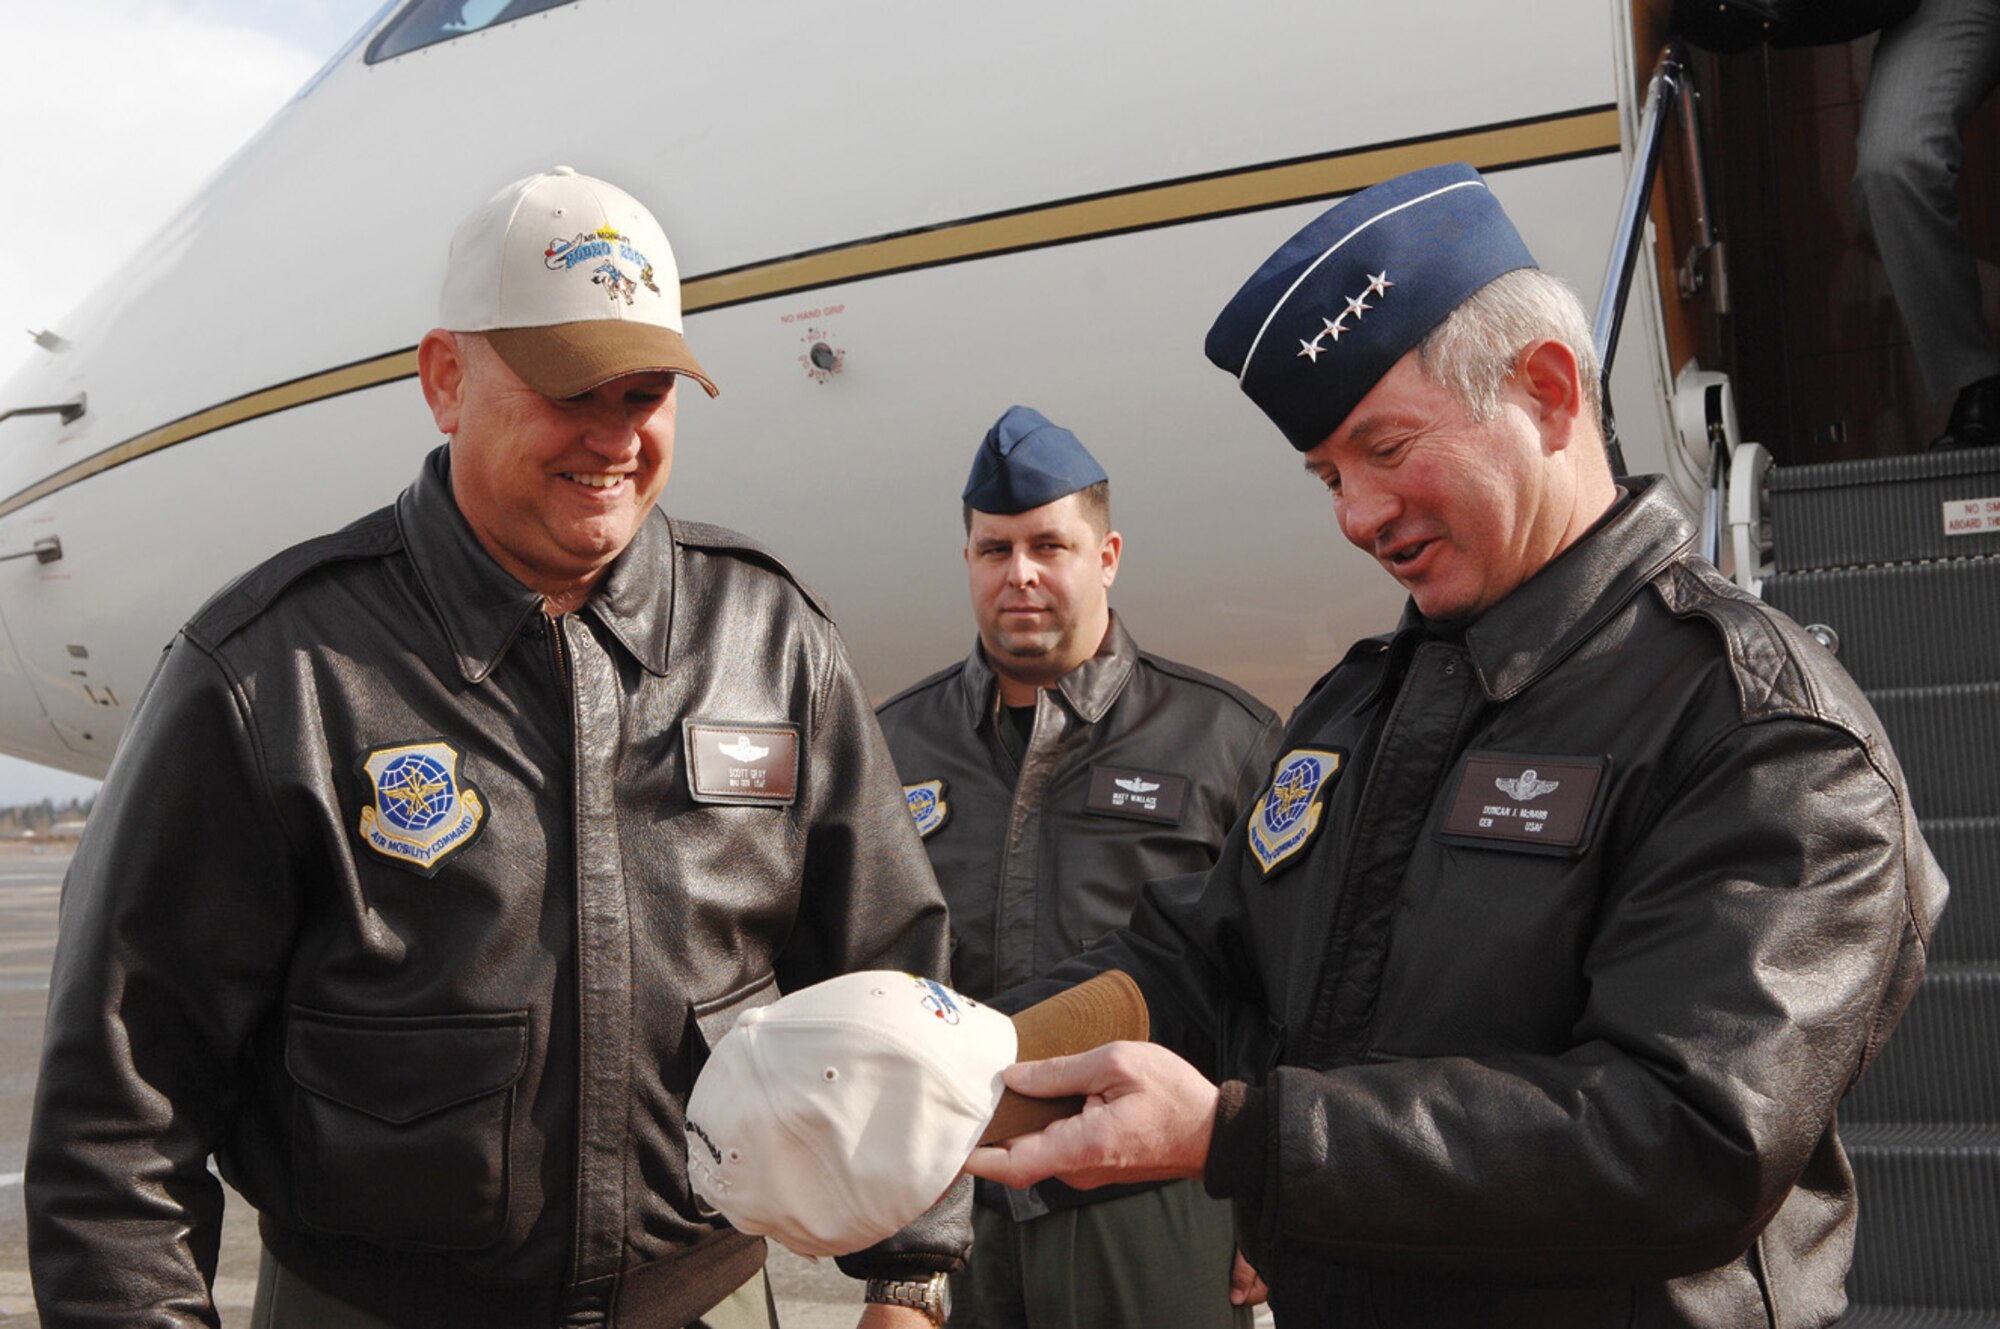 MCCHORD AIR FORCE BASE, Wash., -- Gen. Duncan McNabb, Air Mobility Command commander, right, is handed an AMC Rodeo 2007 hat by Maj. Gen. Scott Gray, Air Mobility Warfare Center commander, upon arriving at McChord Air Force Base Feb. 20 for a Rodeo in progress review visit. (U.S. Air Force photo by Abner Guzman) 